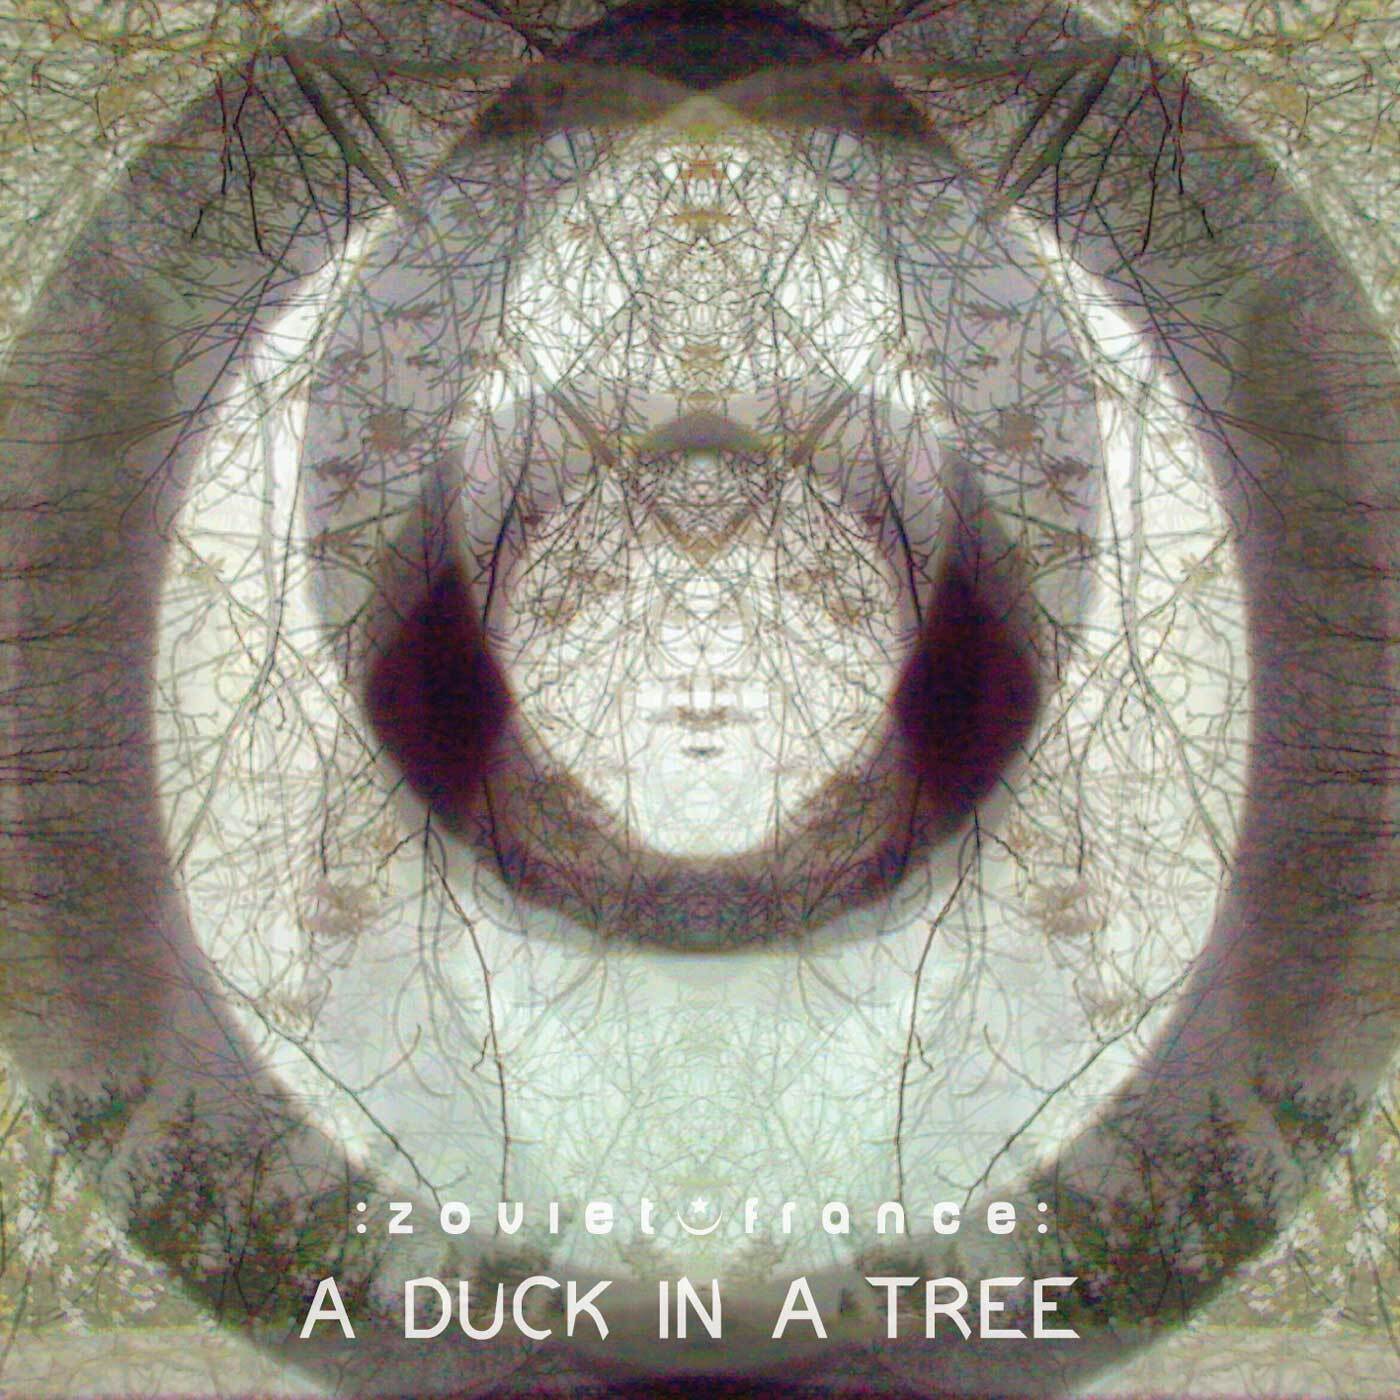 A-Duck-in-a-Tree-2014-03-01-_-The-Ambigu